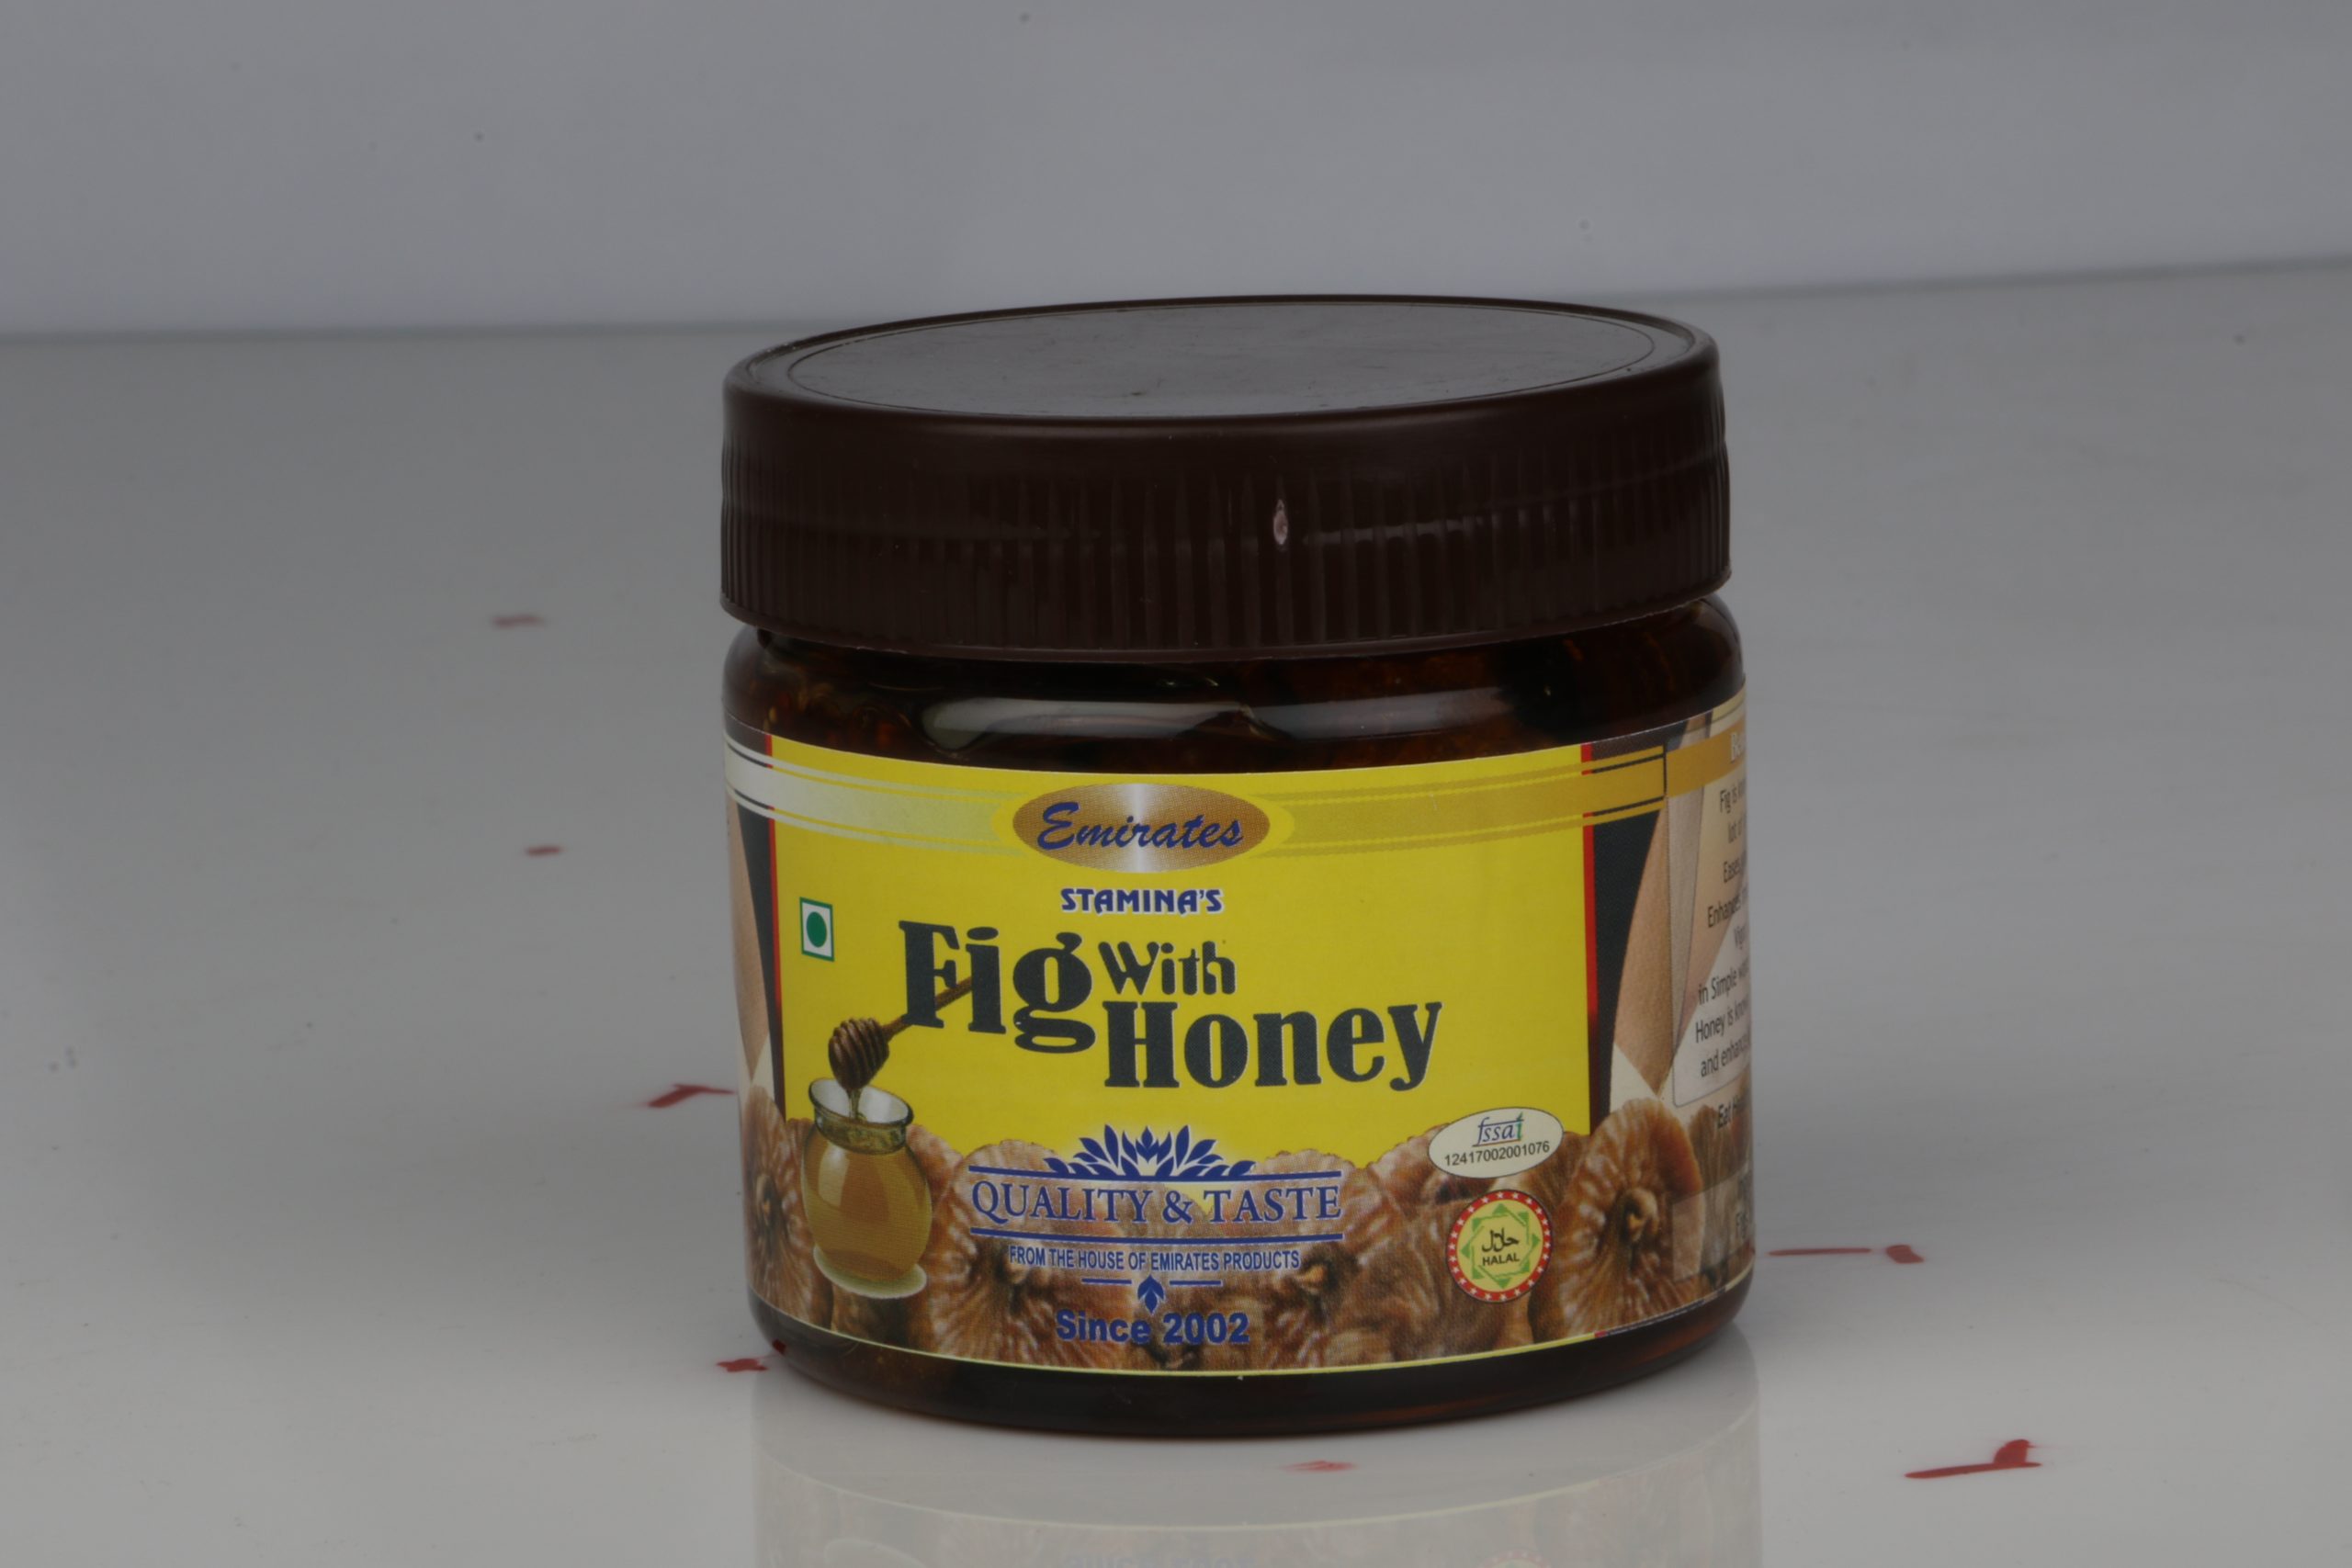 EMIRATES FIGS WITH HONEY 350GM